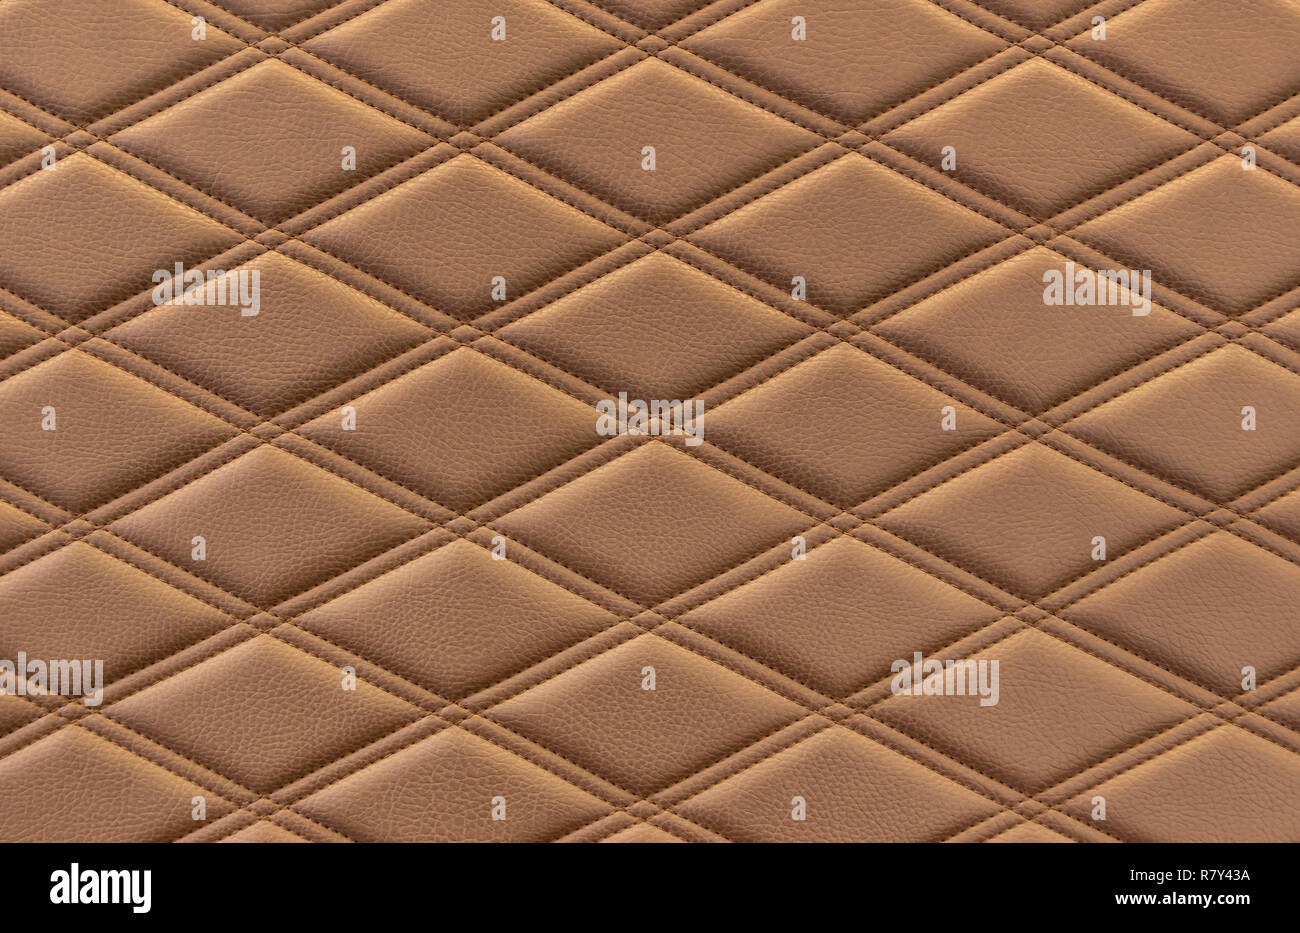 https://c8.alamy.com/comp/R7Y43A/brown-quilted-leather-upholstery-texture-R7Y43A.jpg